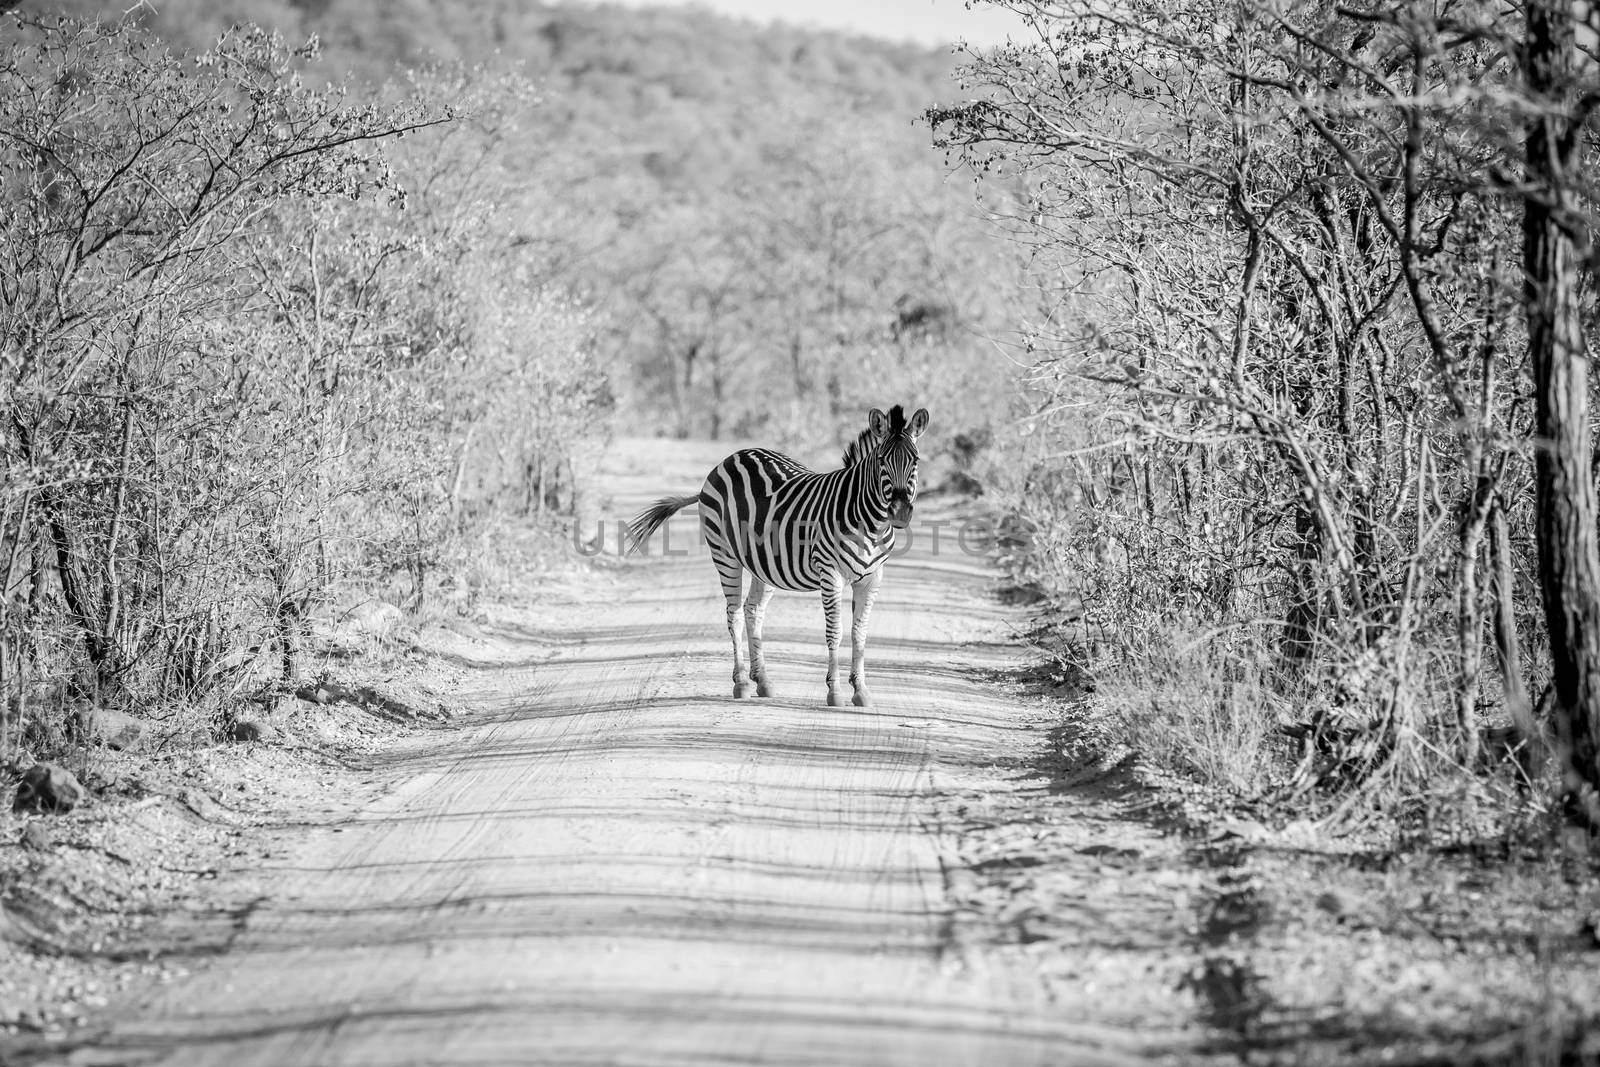 Zebra standing in the middle of a bush road in black and white in the Welgevonden game reserve, South Africa.